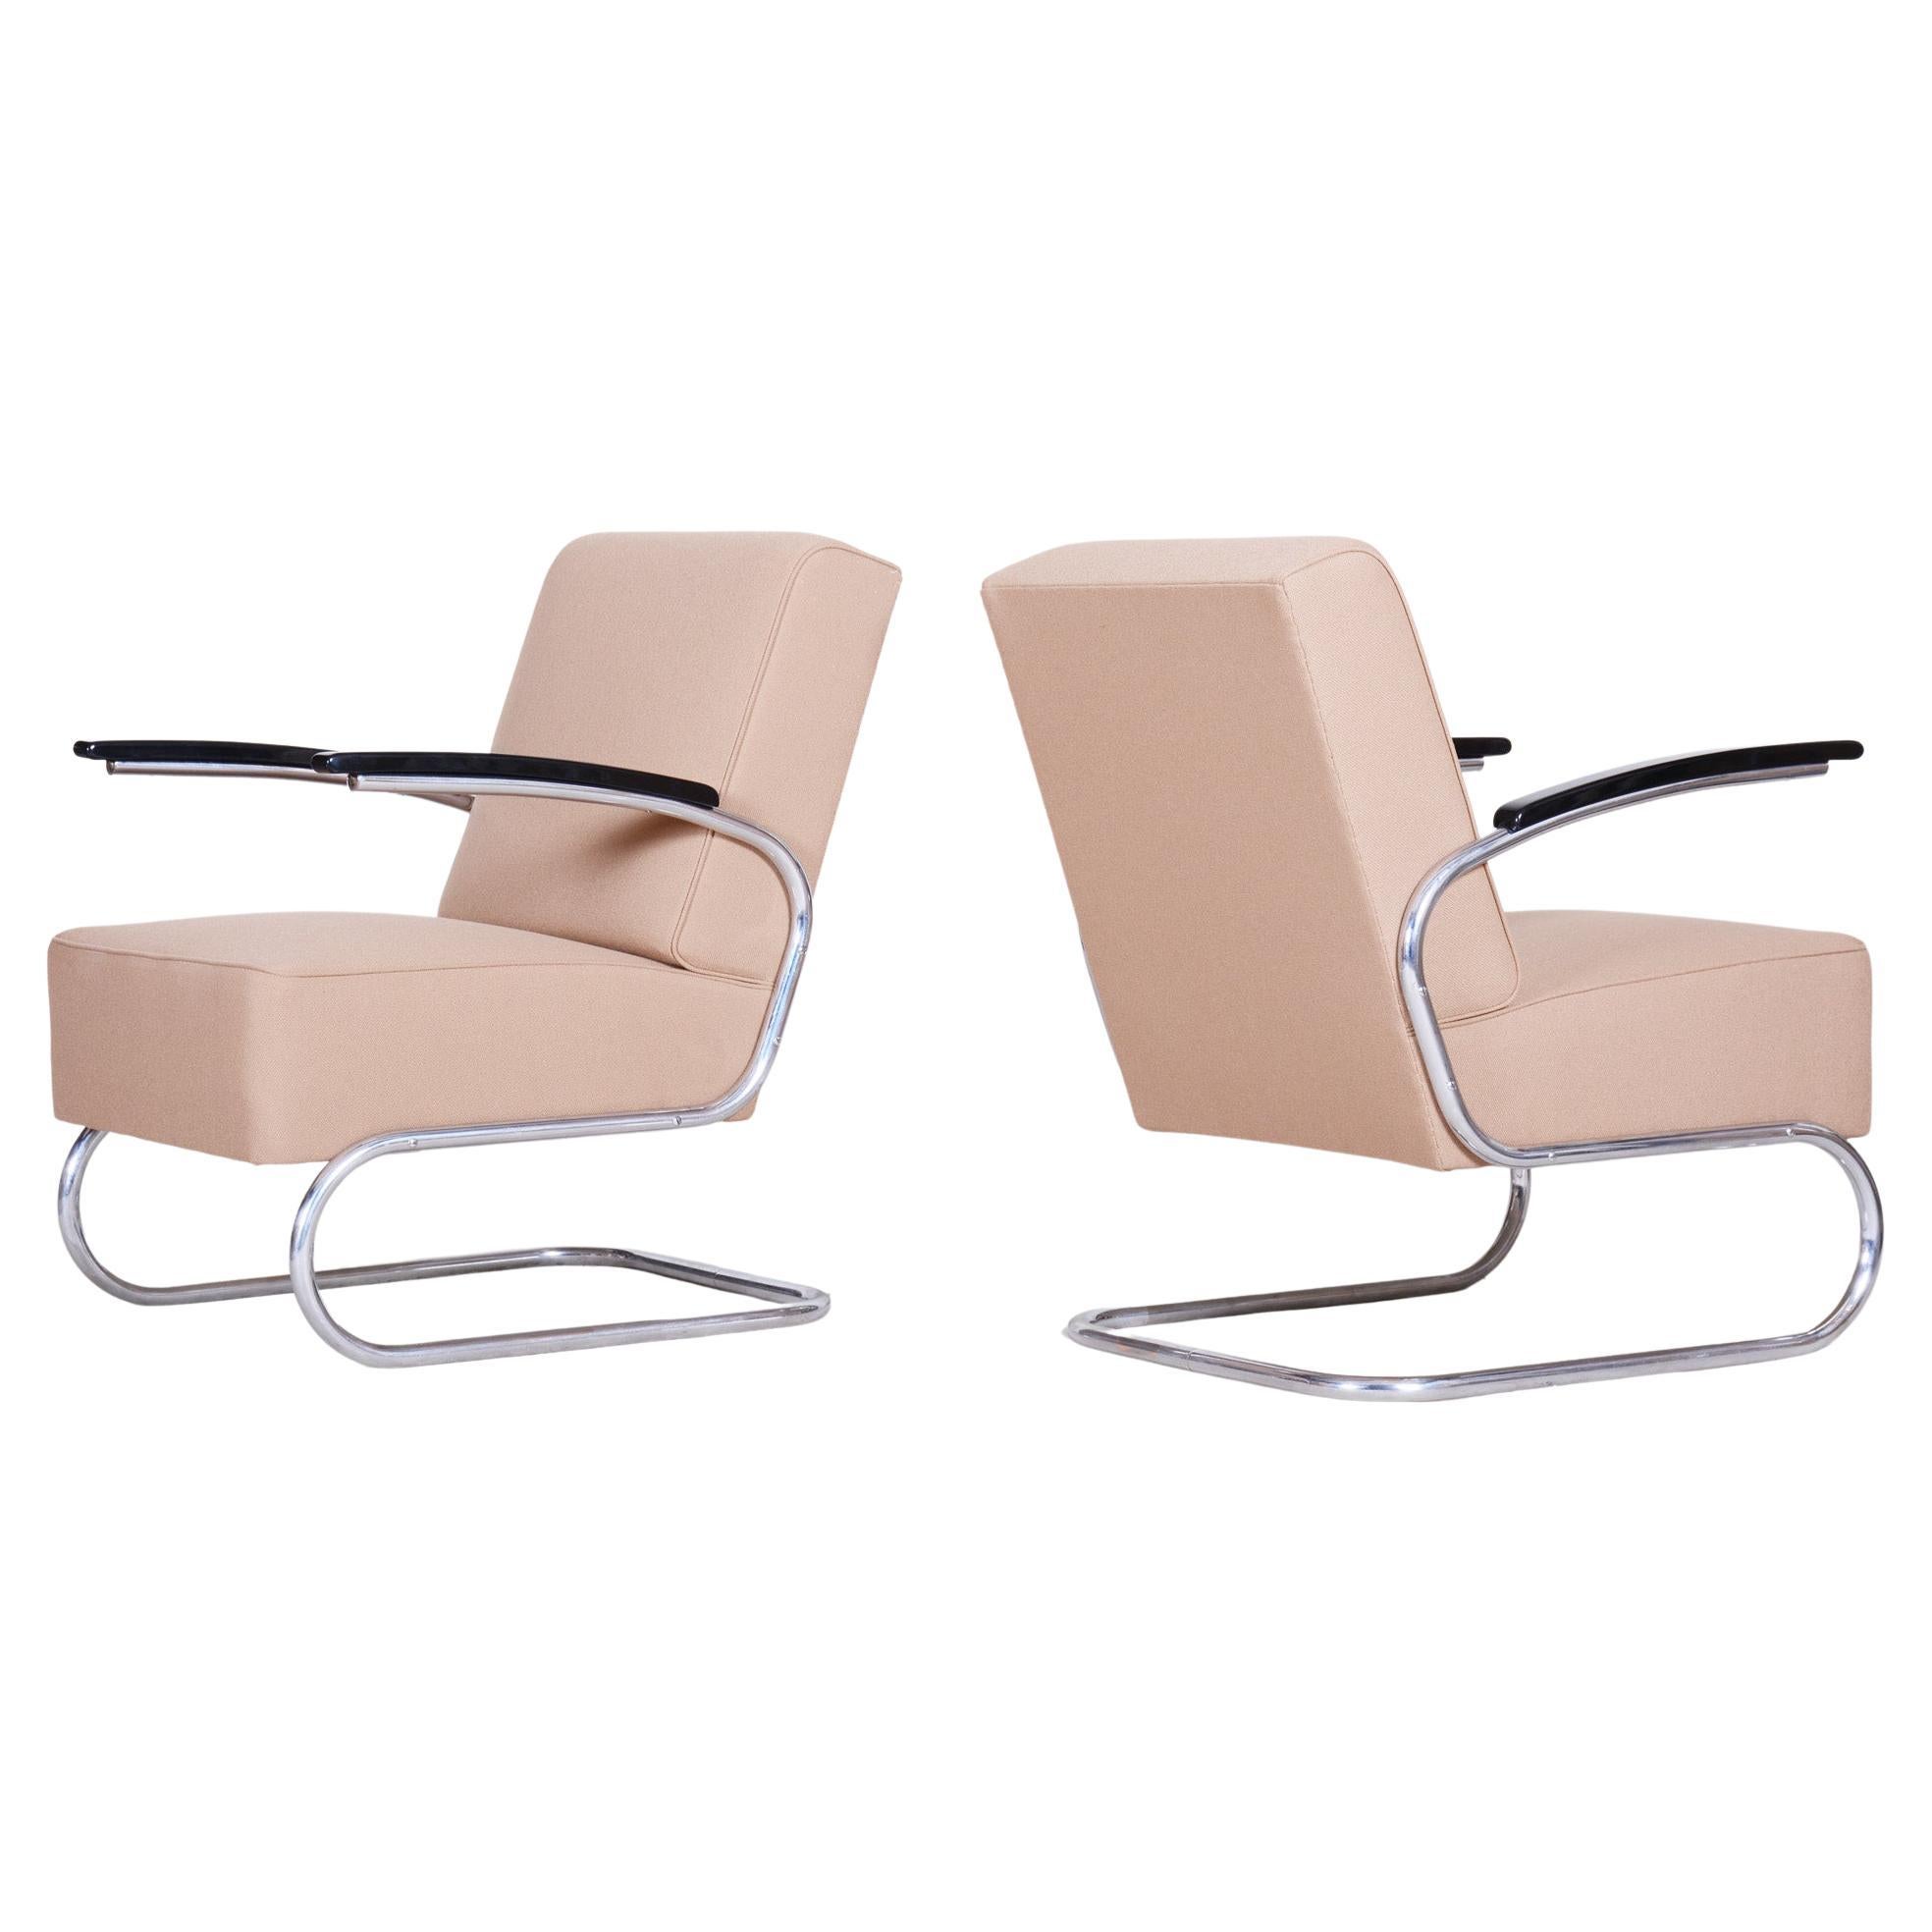 Chrome Bauhaus Armchairs Designed by Mücke Melder, Fully Refurbished, 1930s For Sale